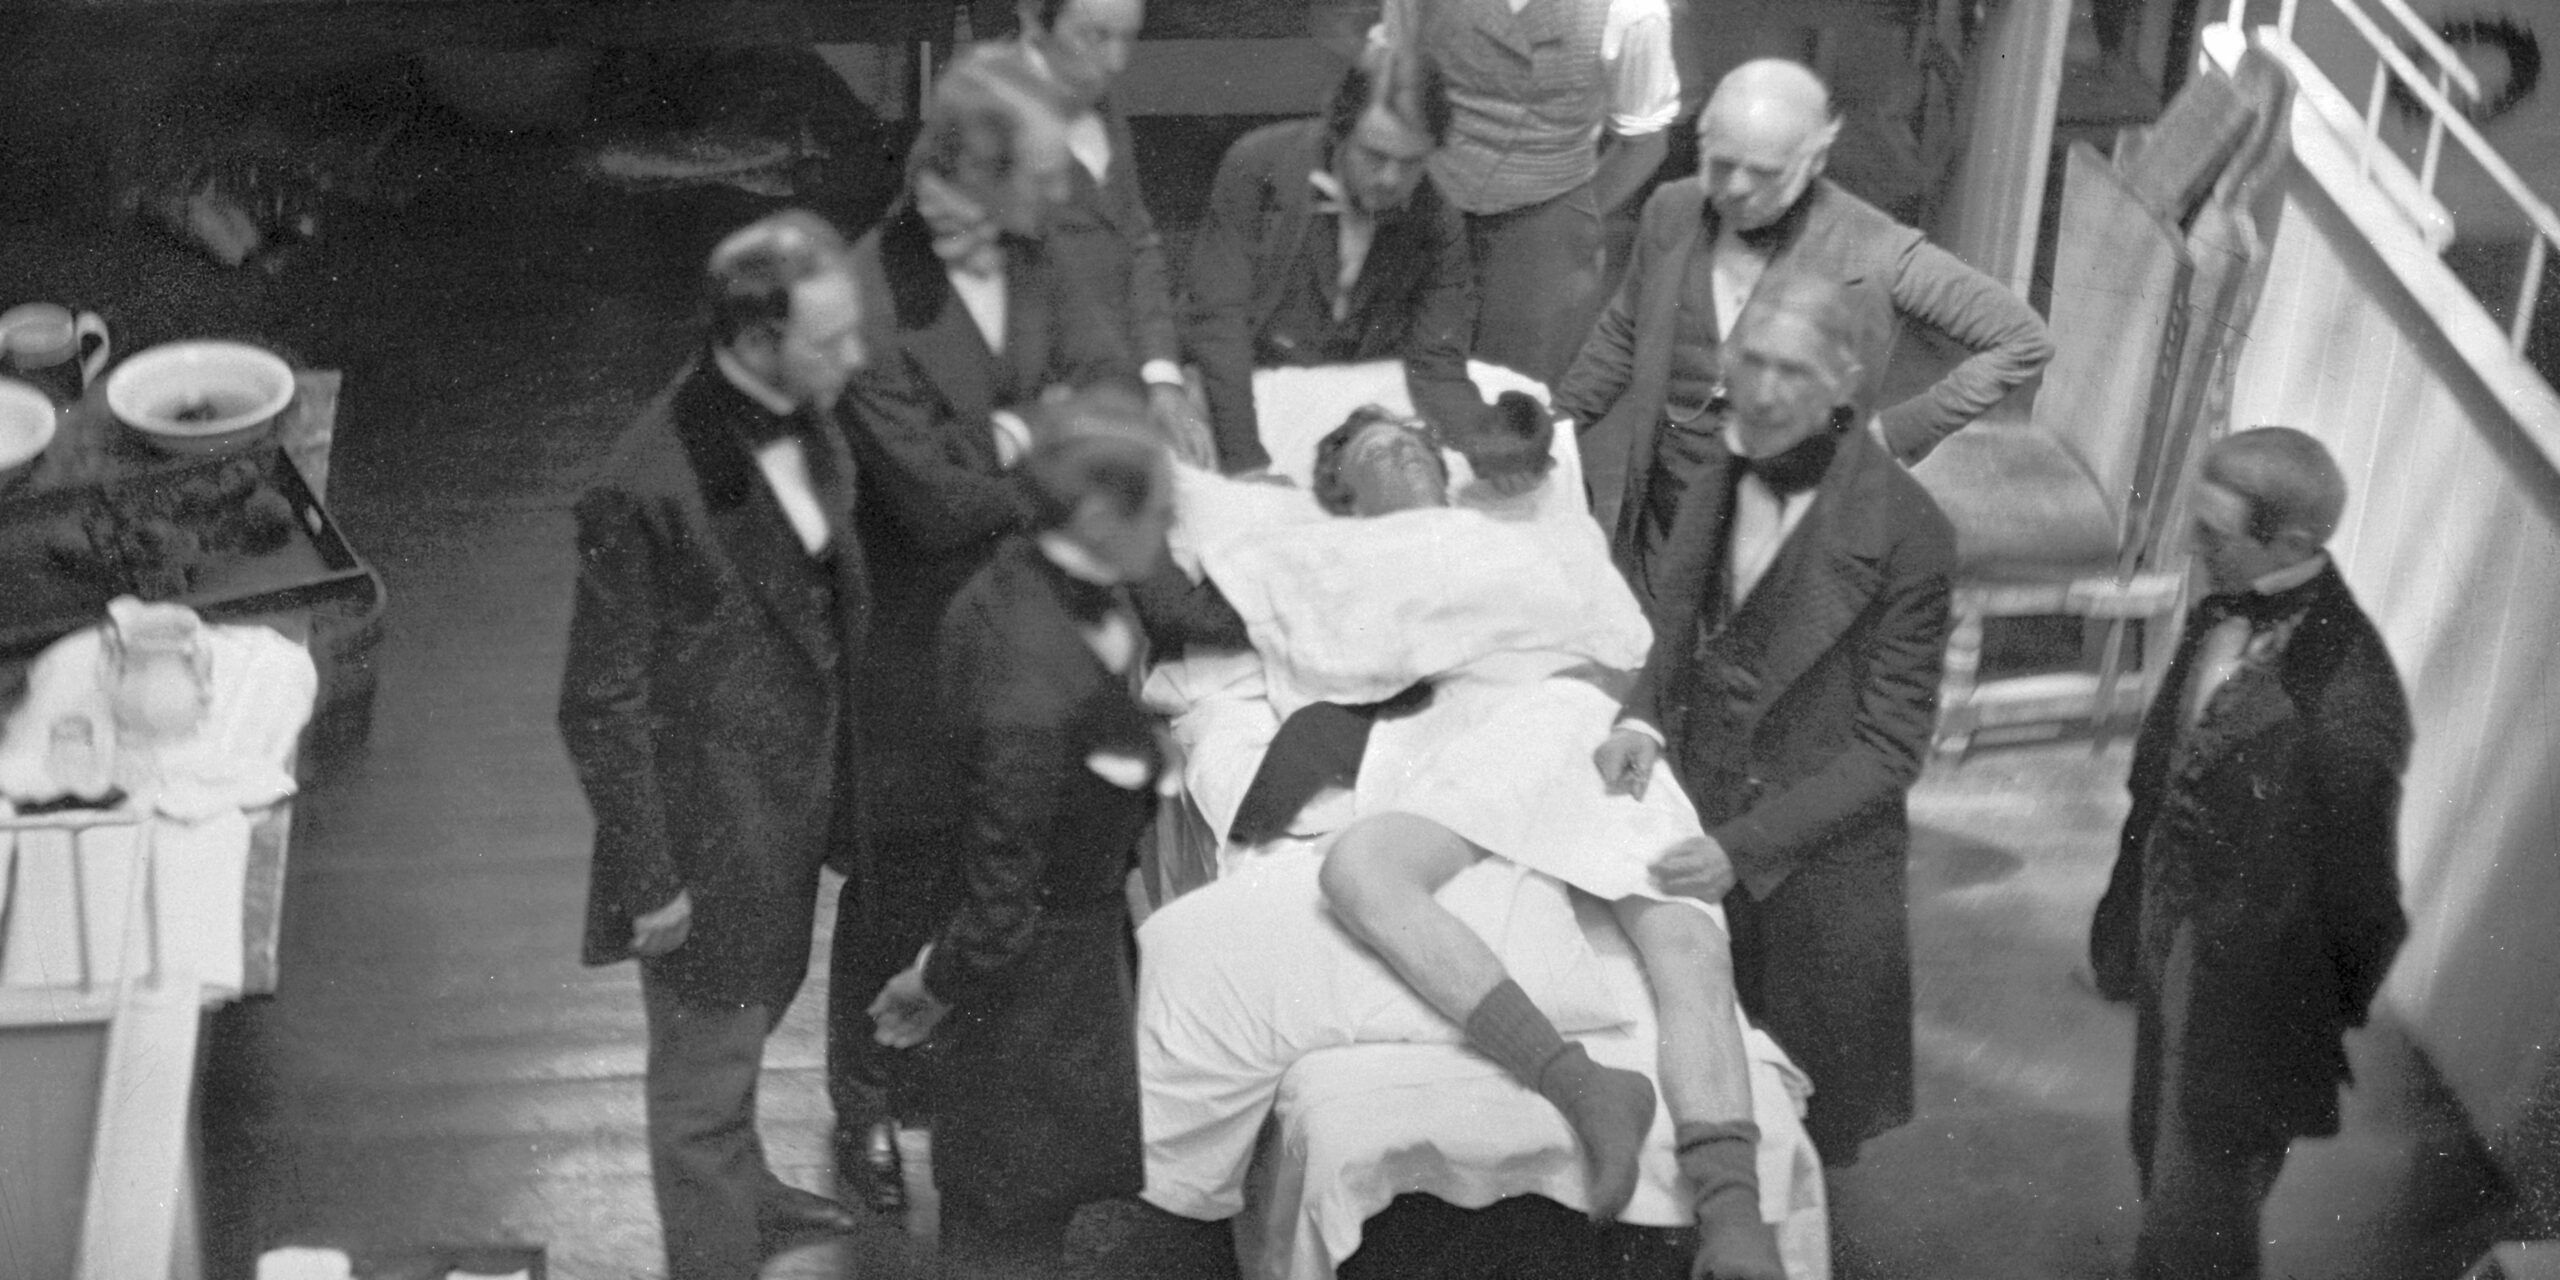 Image of doctors crowded around patient in old operating theater